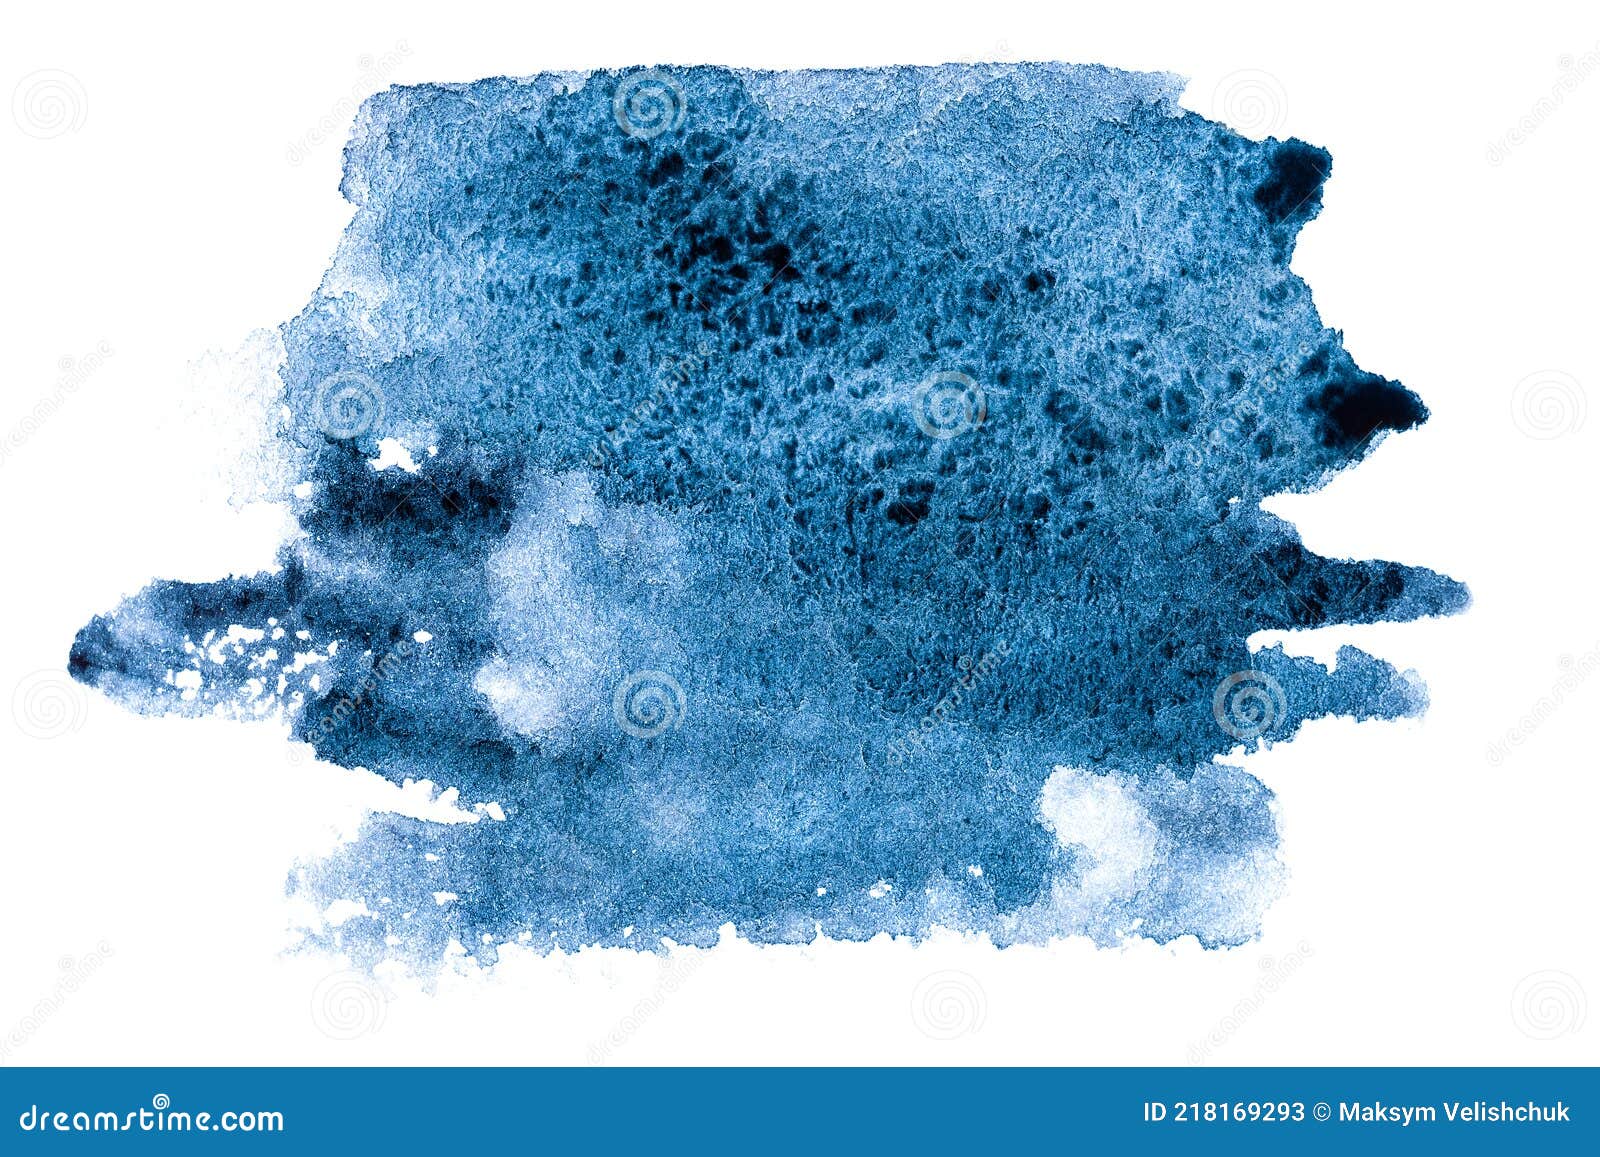 Vivid blue watercolor or ink stain with aquarelle paint blotch